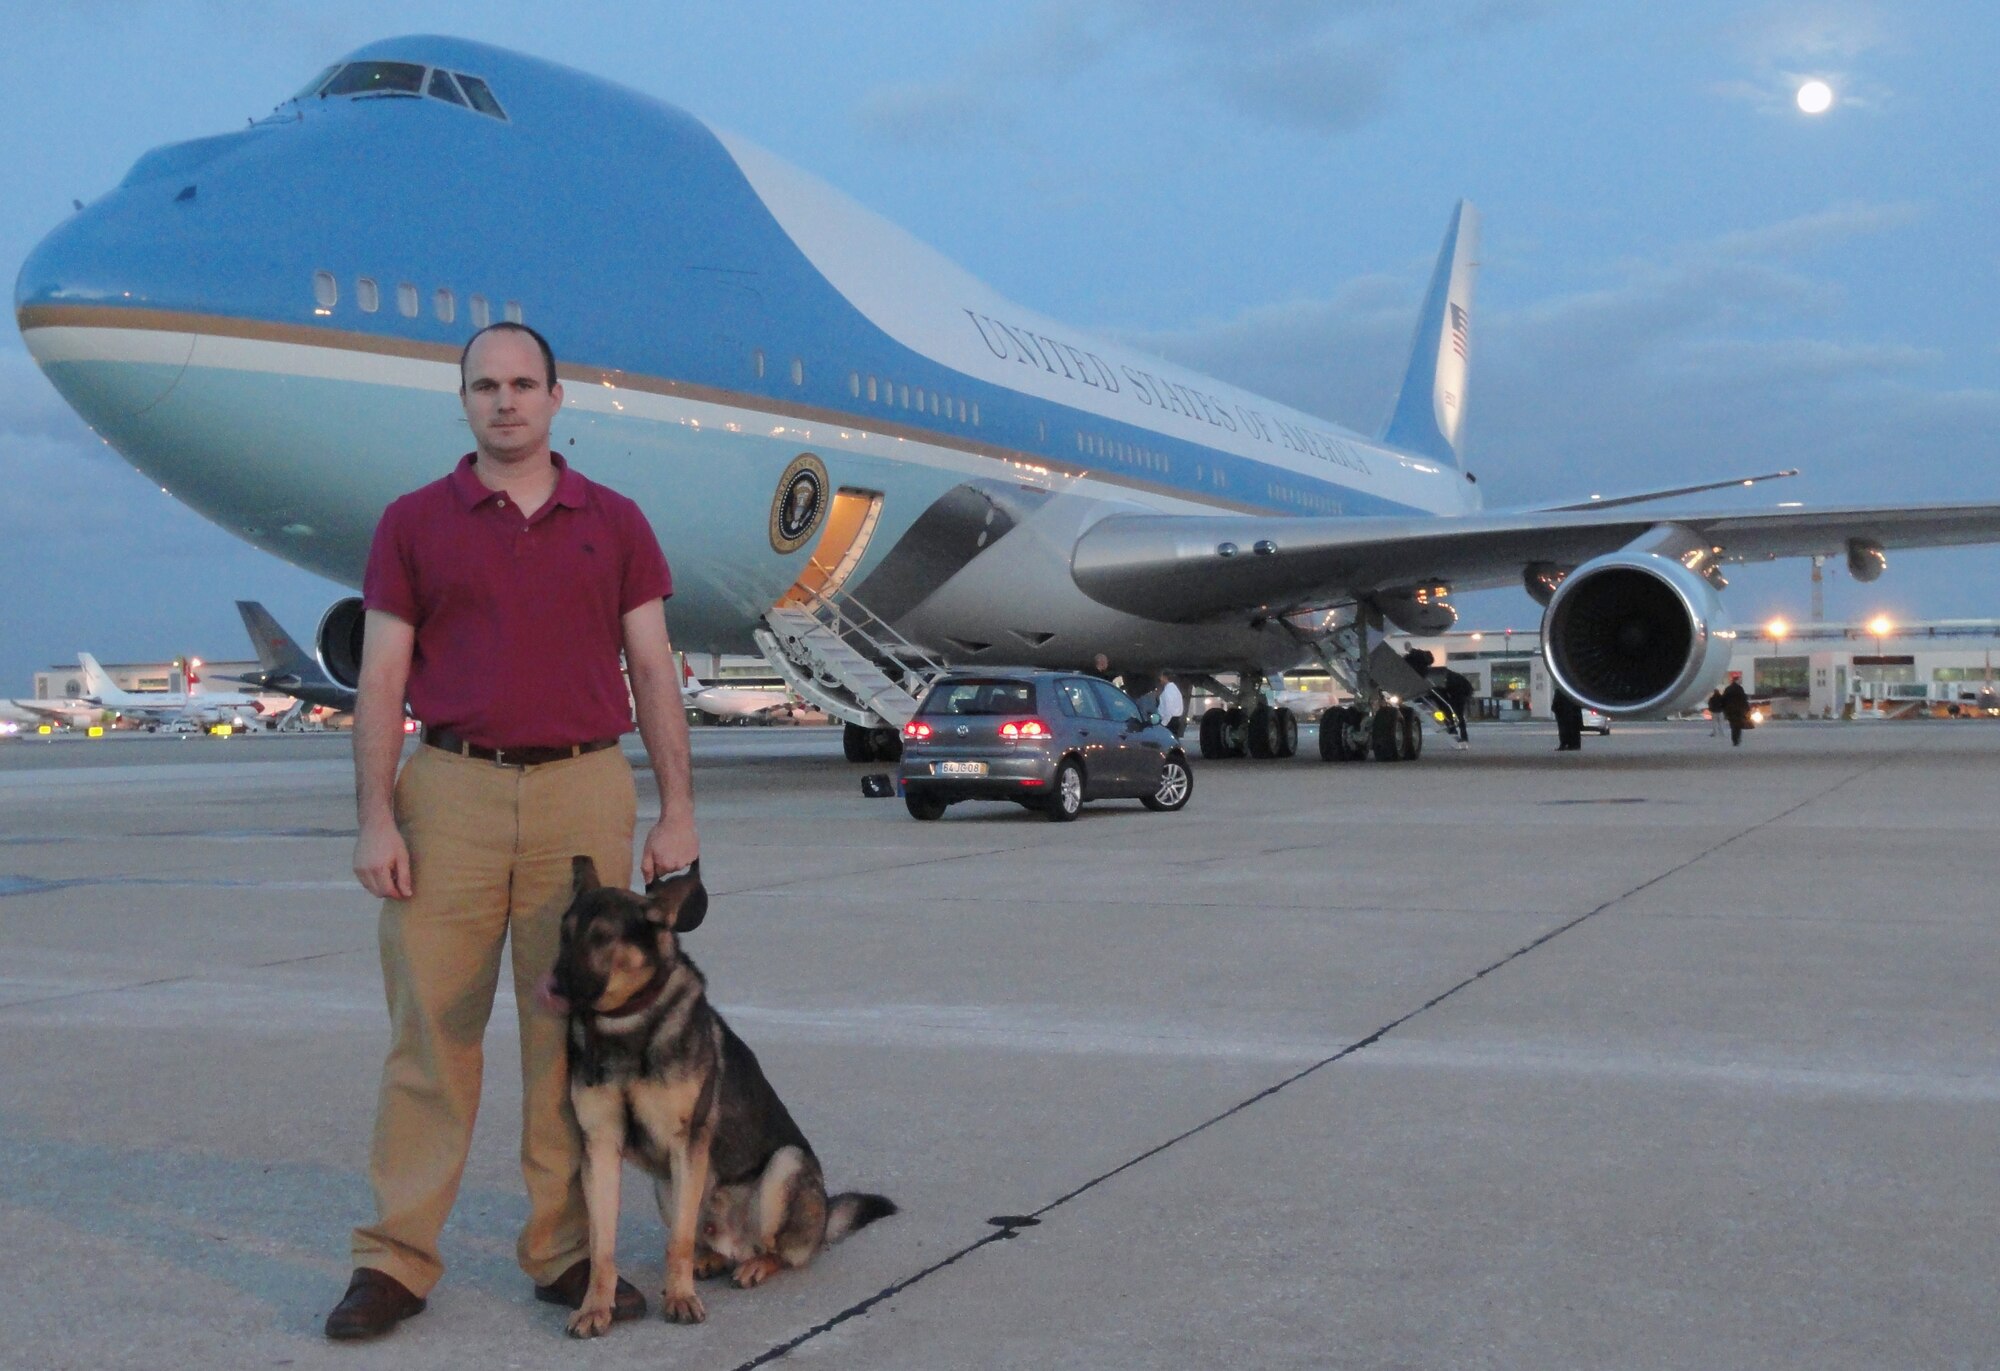 Staff Sgt. Curtis Locke and his K-9, Devil, deployed to Lisbon, Portugal, Nov. 15, 2010, through 22, 2010, to help provide the presidential jet with a specialized detection capability for Air Force One at the G40 summit. Sergeant Locke is assigned to the 65th Security Forces Squadron. (Courtesy photo)